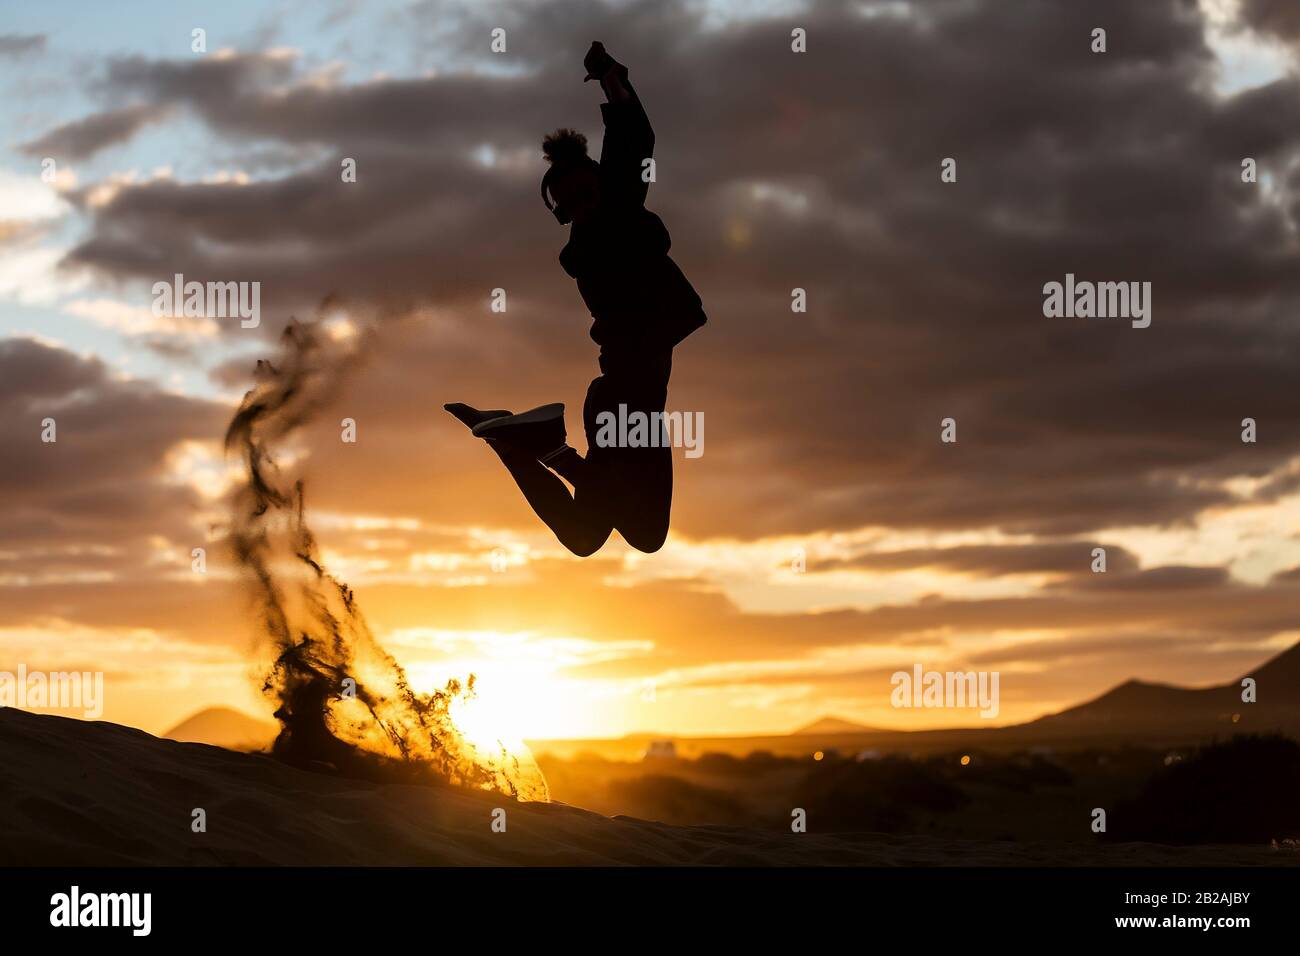 Silhouette of anonymous person leaping up on sandy coast against beautiful cloudy sundown sky. Stock Photo